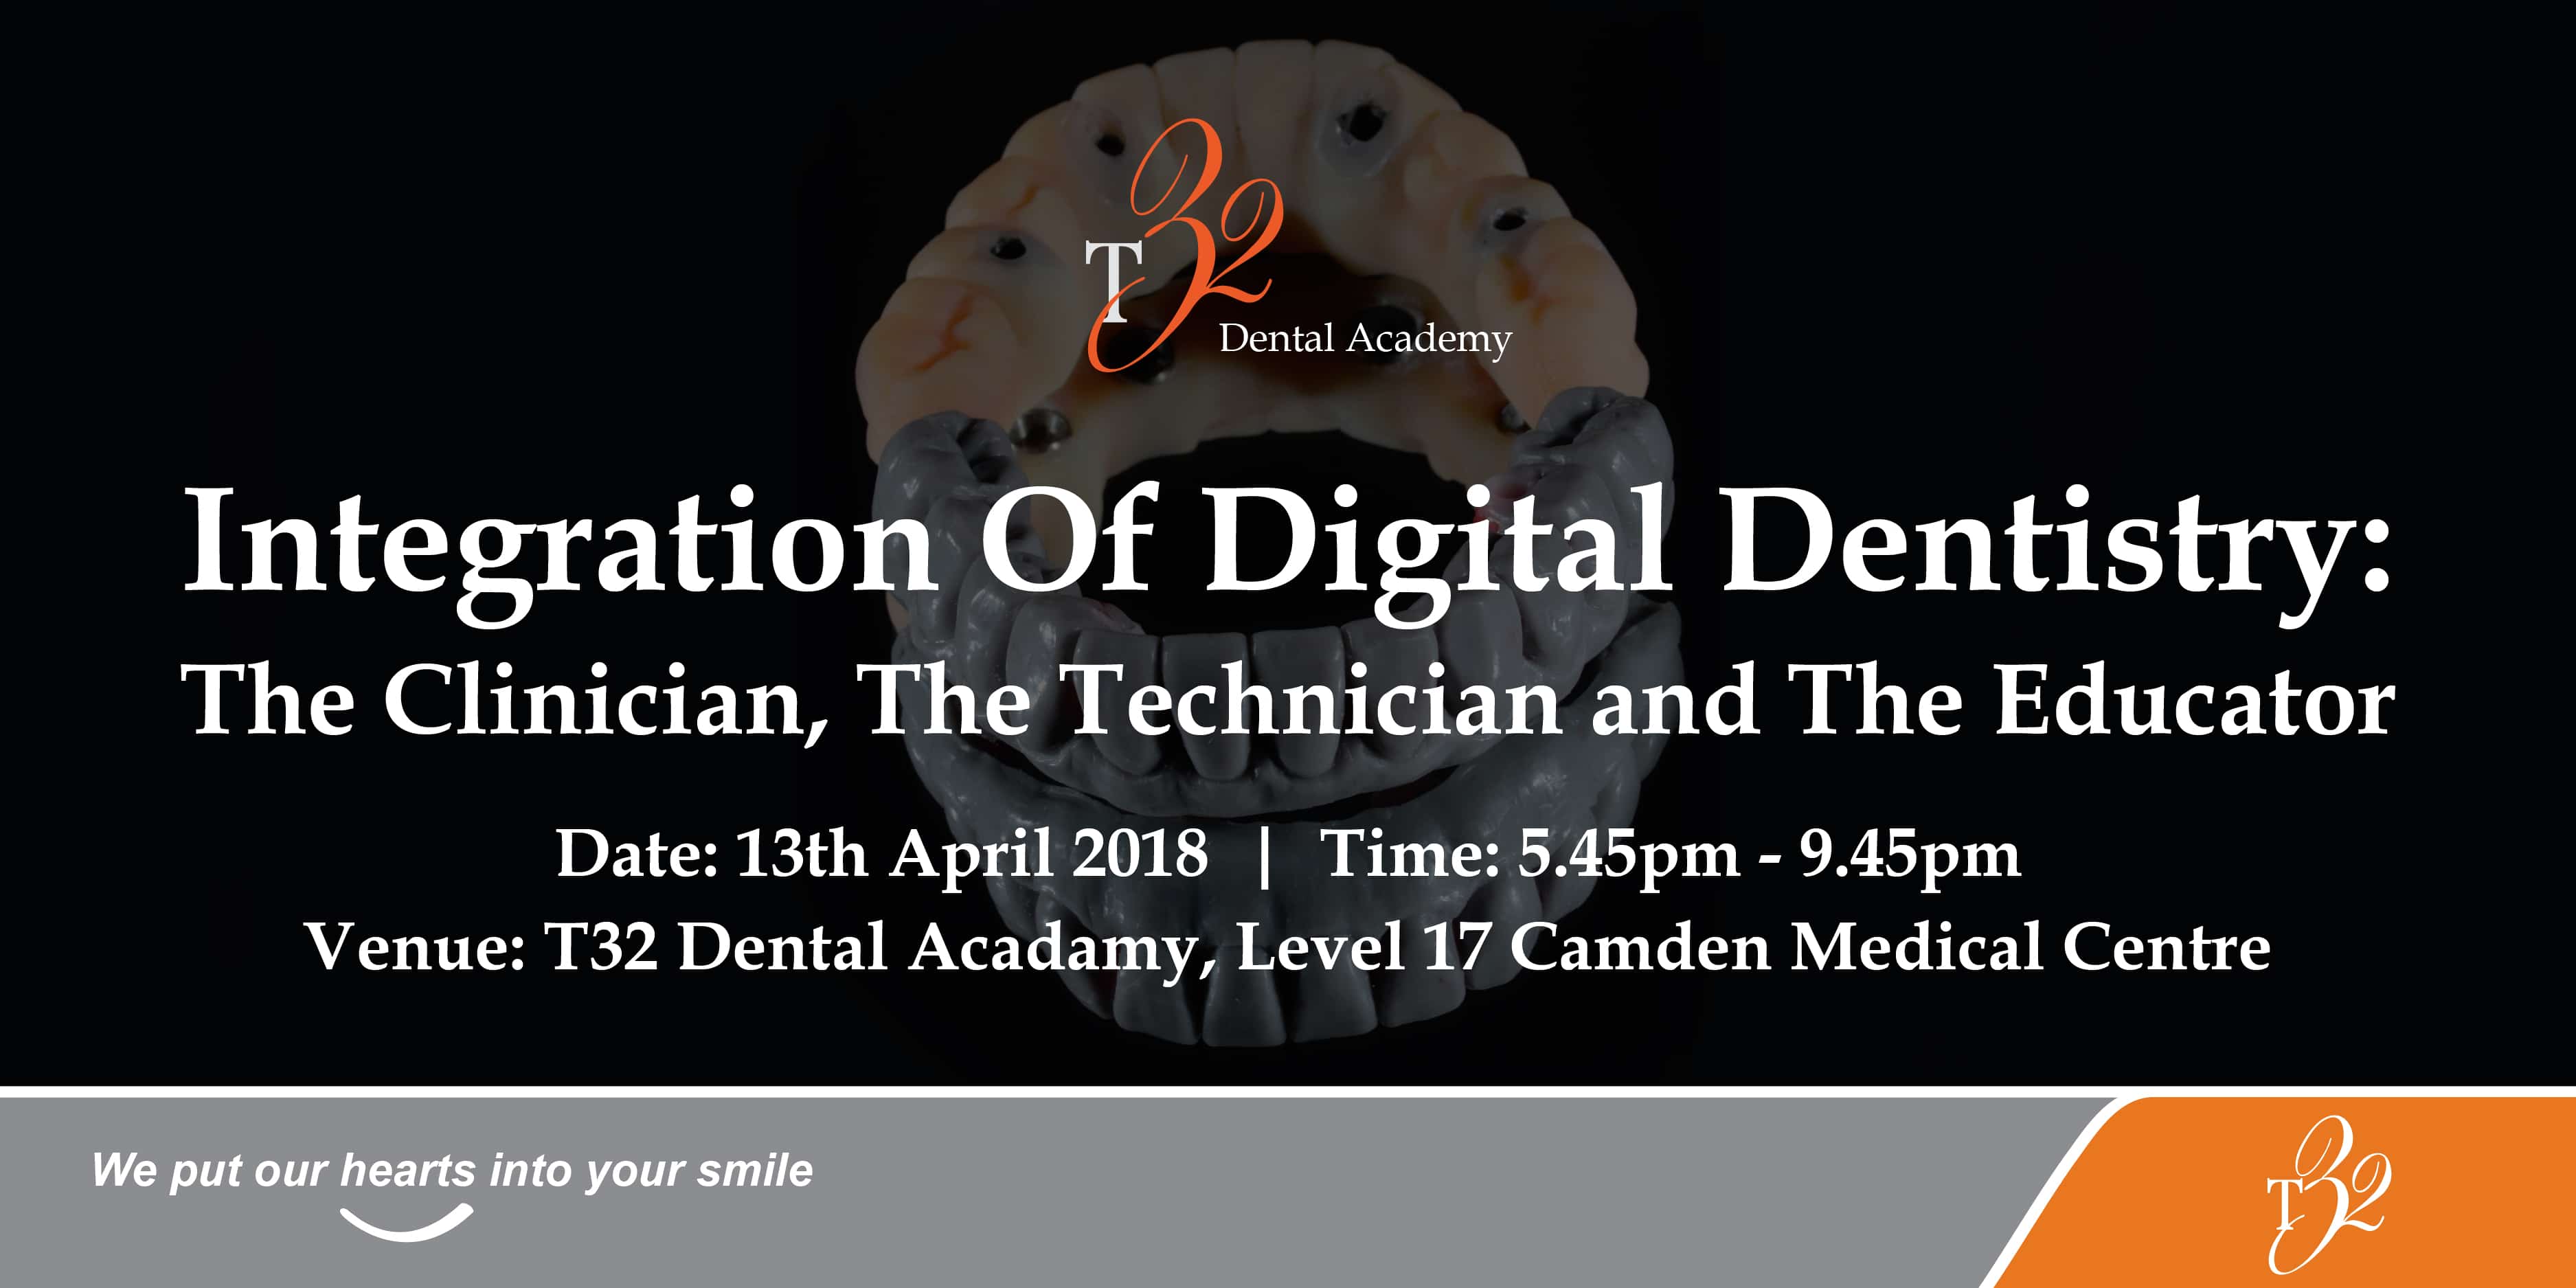 Featured Image for T32Dental Events Integration Of Digital Dentistry Article